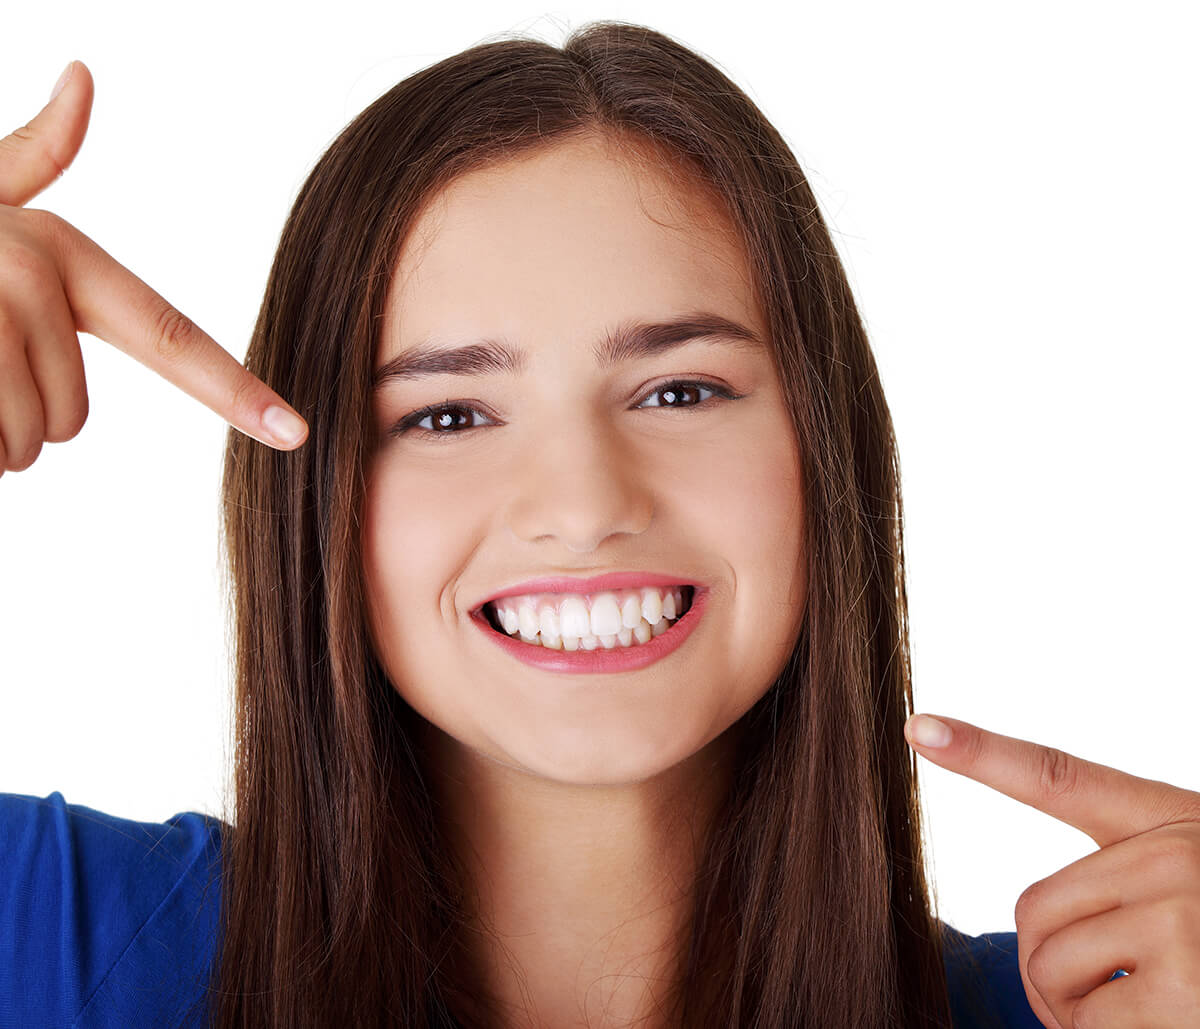 Dentist in Fort Lauderdale Area Explains the Relationship Between the 3rd First Molar Tooth and Whole-body Wellbeing